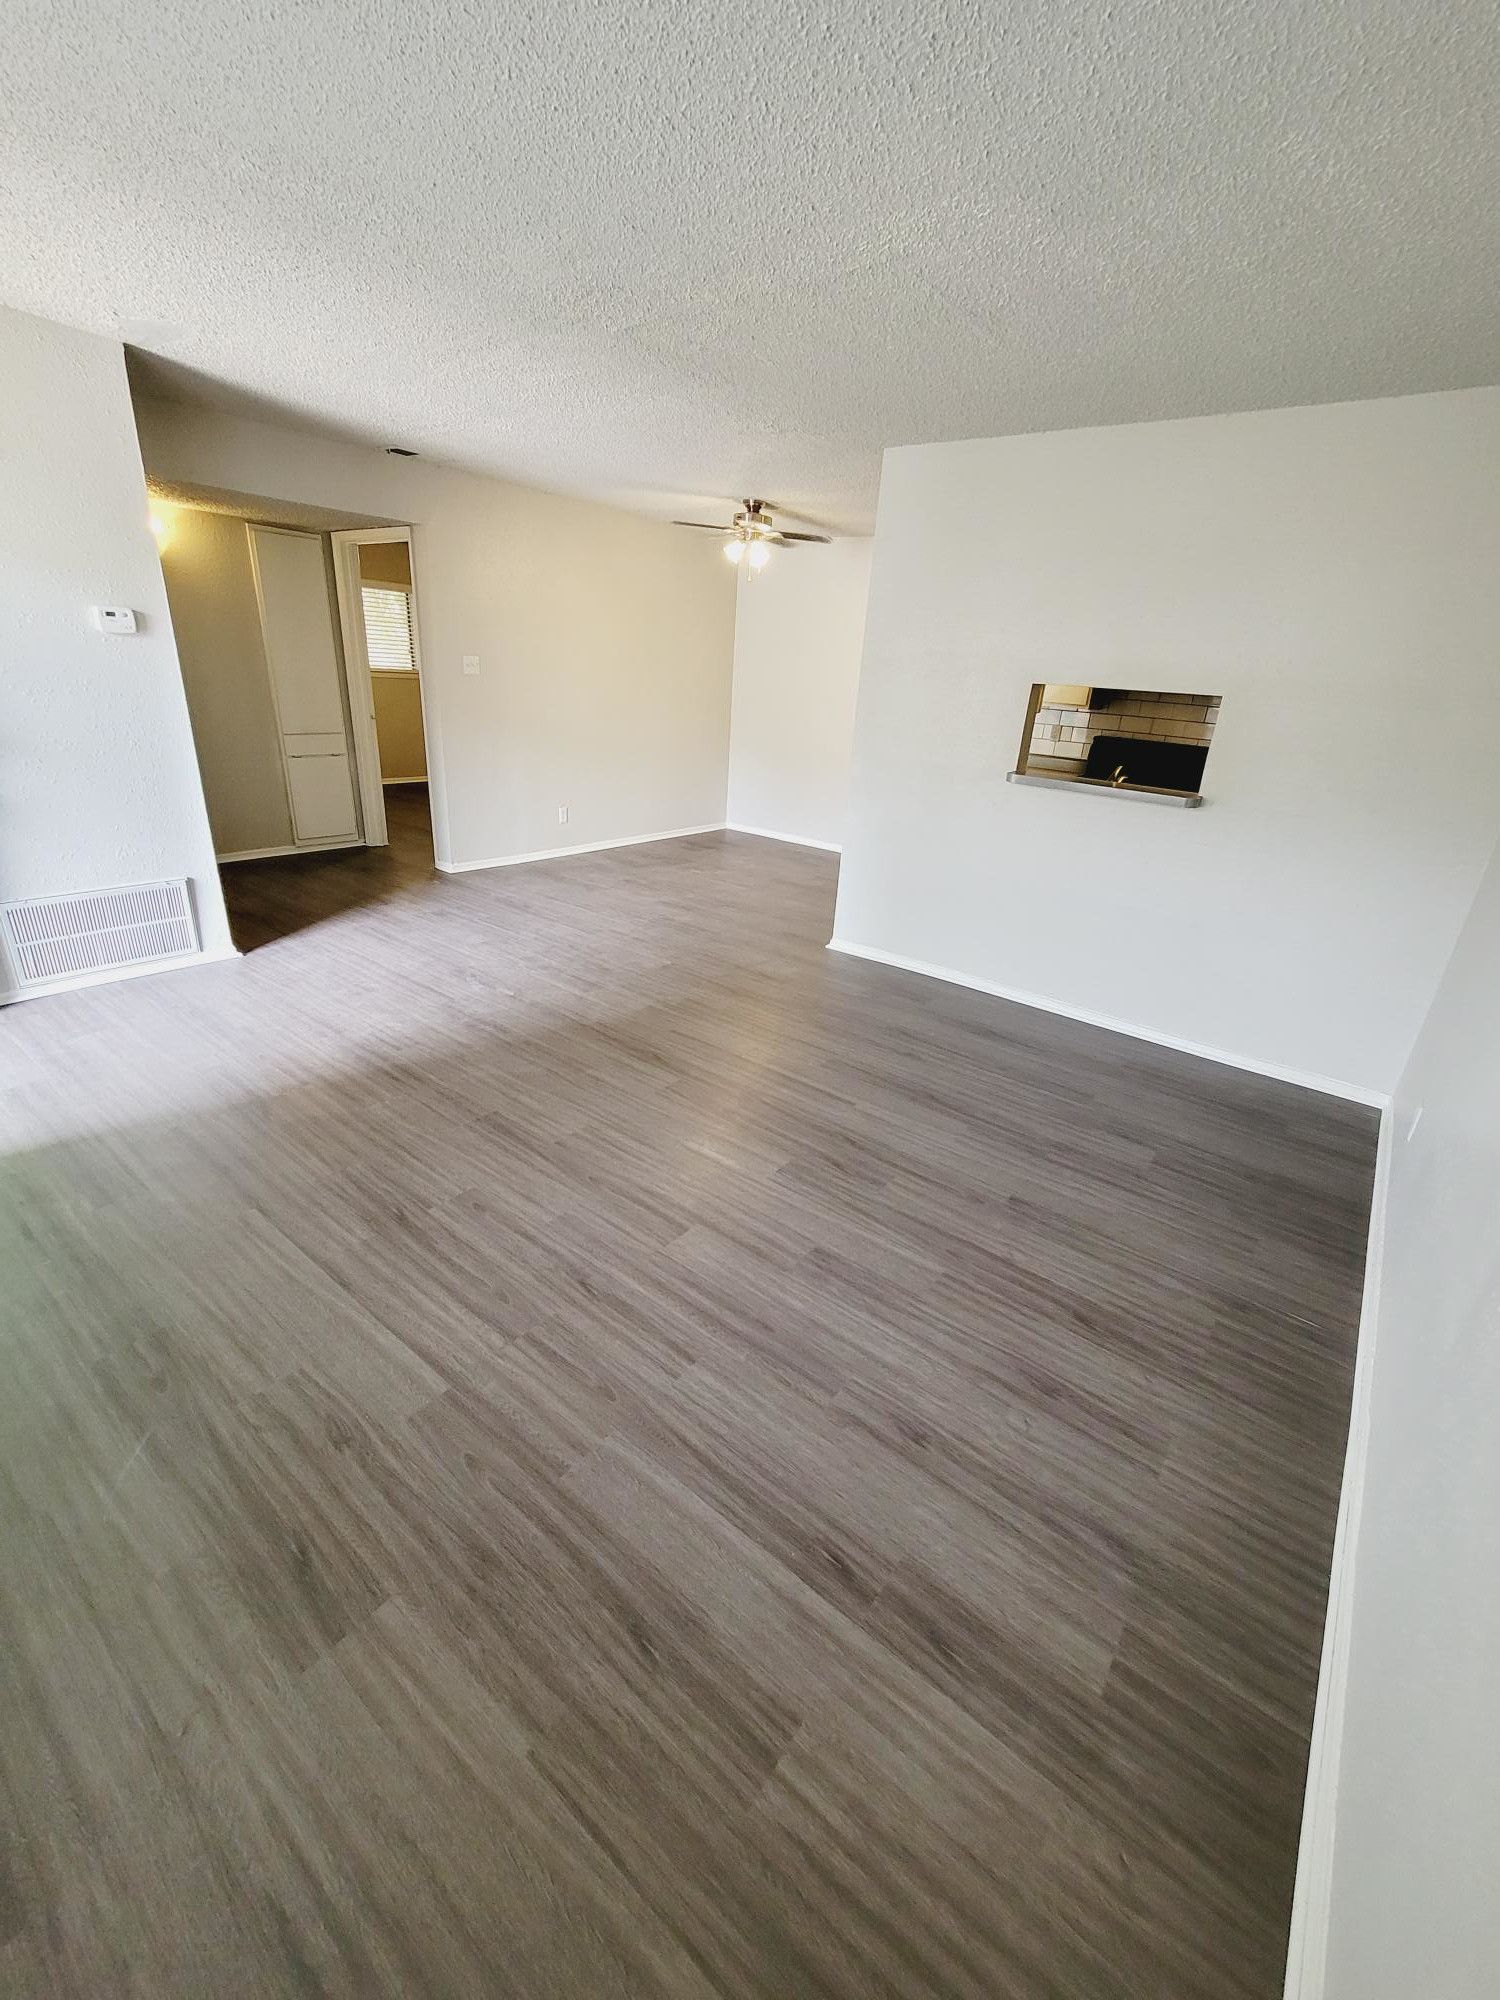 Abode Apartments - 805sqft, 1 Bed 2 Bath - Living Room and Kitchen